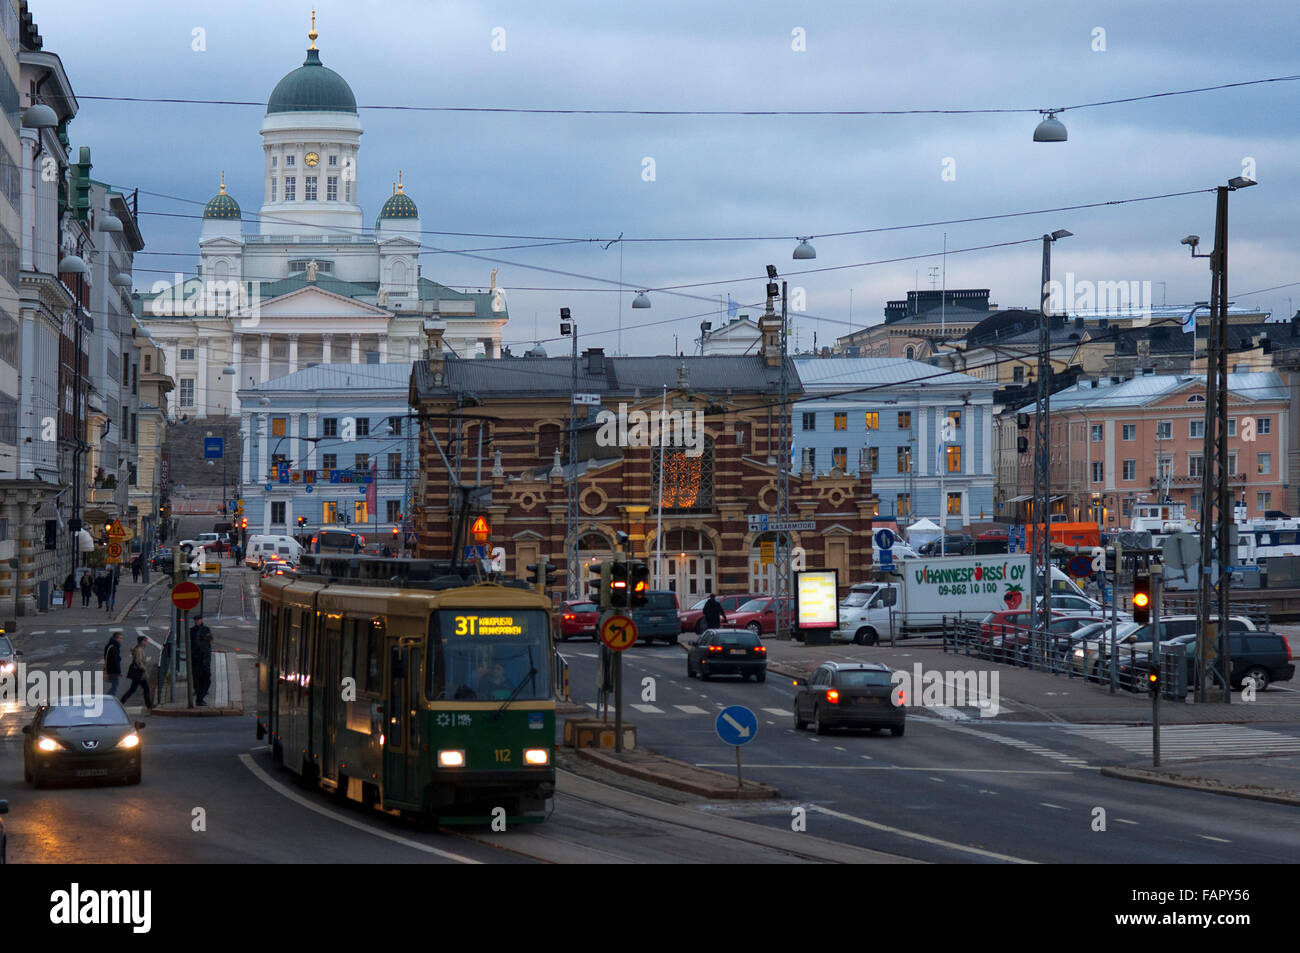 General view of the Helsinki city with the tram, market, and the Senaatintori Lutheran Cathedral from the Eteläranta street. Stock Photo